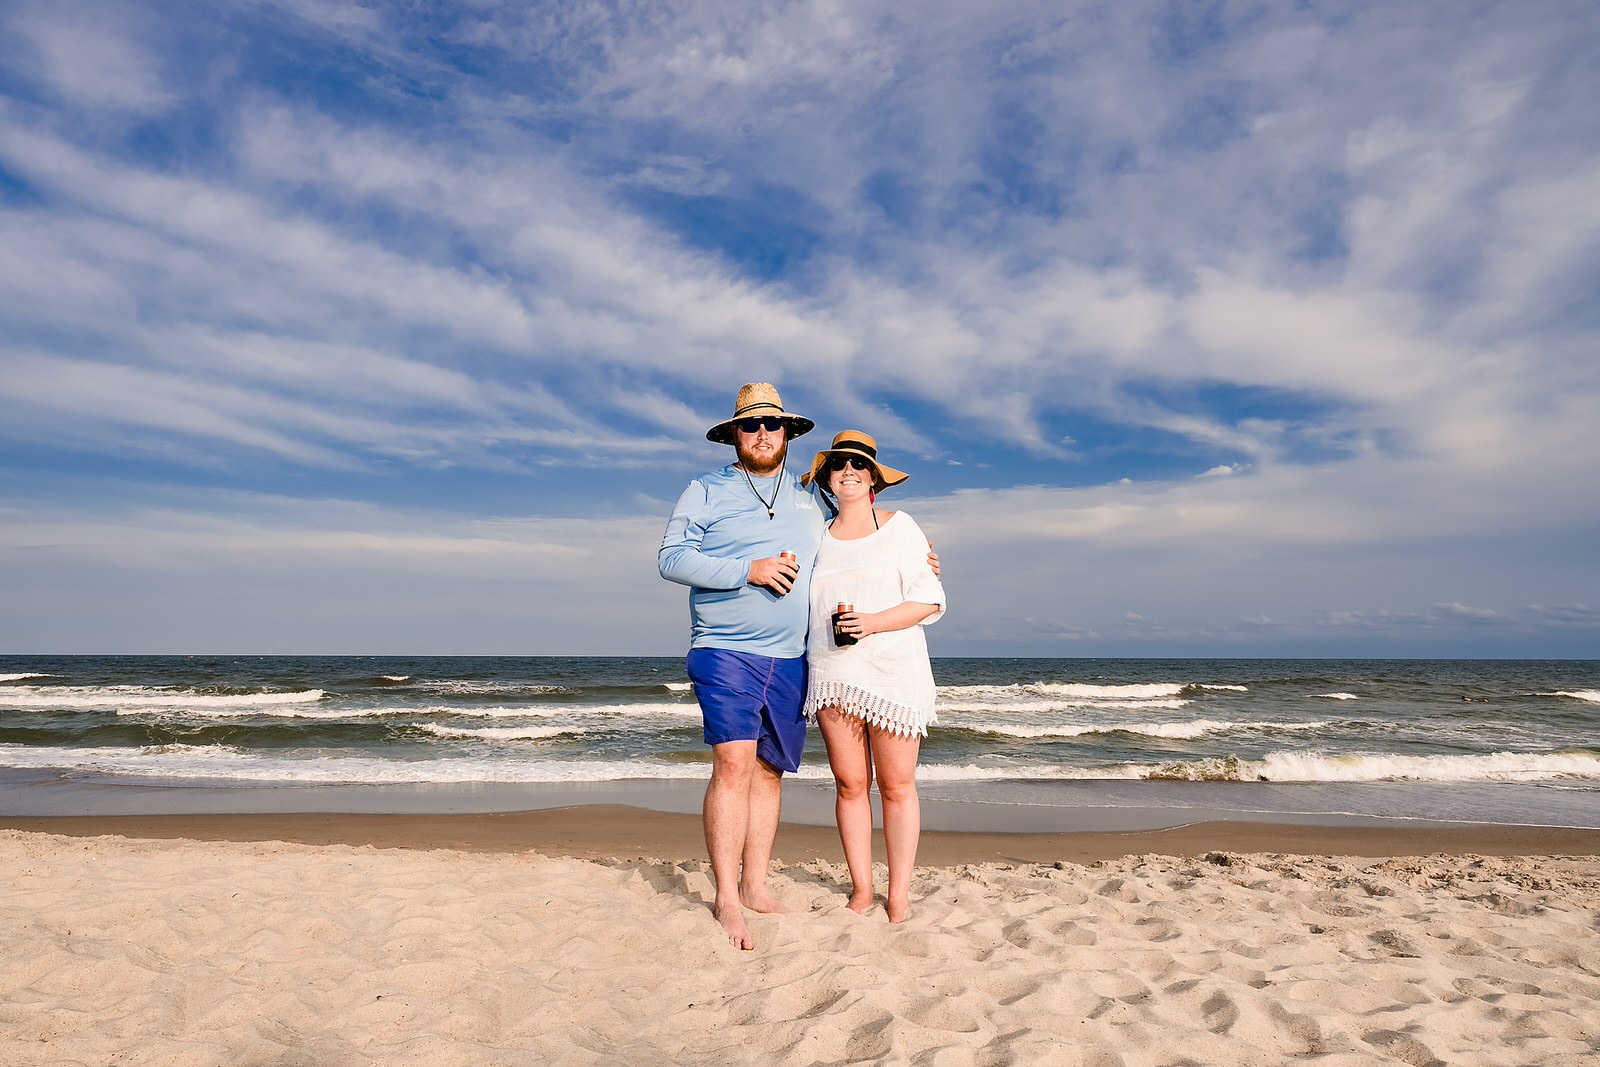 Bride and groom pose in their beach attire at Kure Beach during a casual wedding reception after a ceremony at the Brooklyn Arts Center